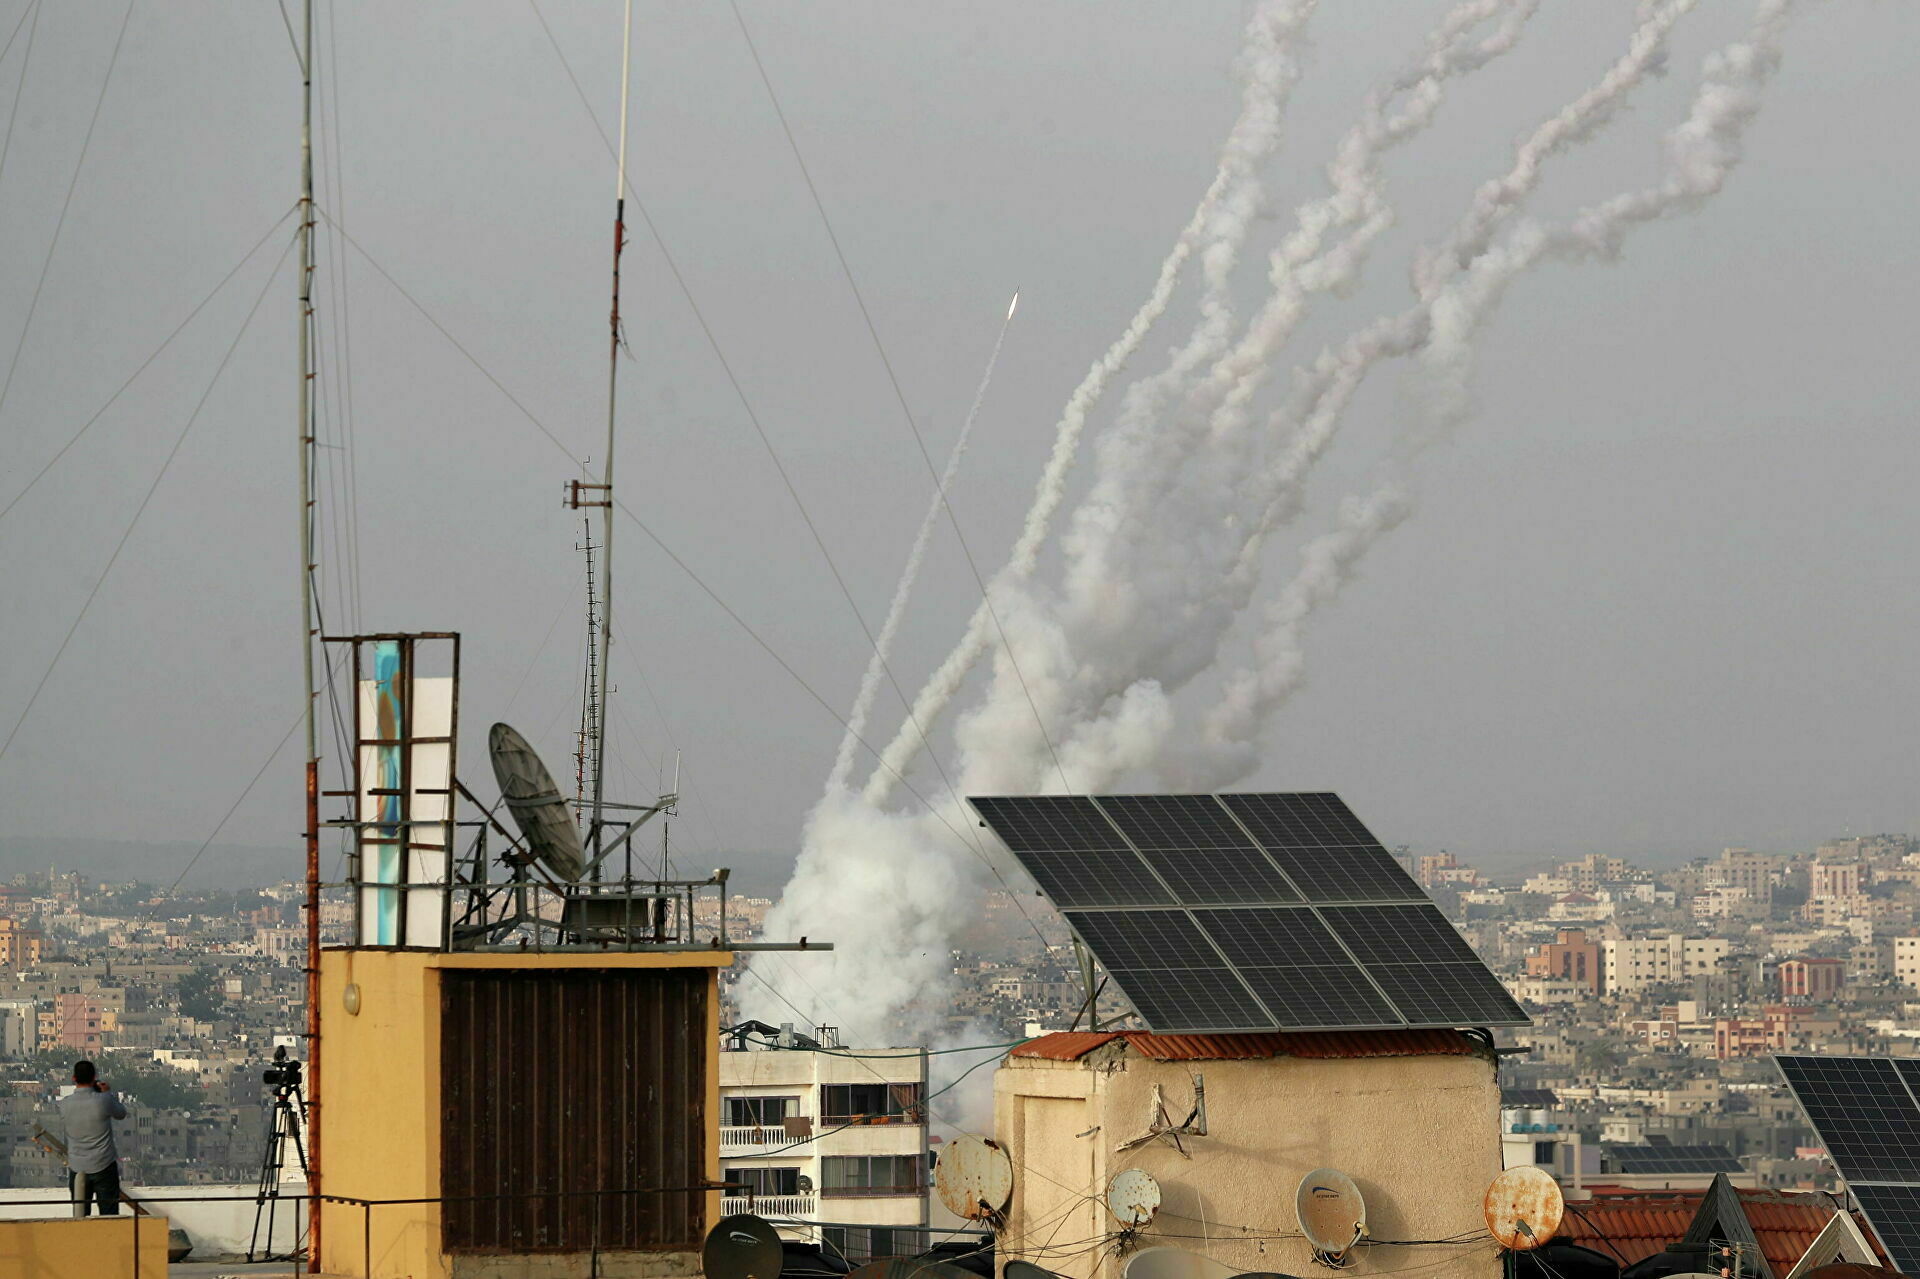 Israel counted 1,600 rockets fired at it from the Gaza Strip